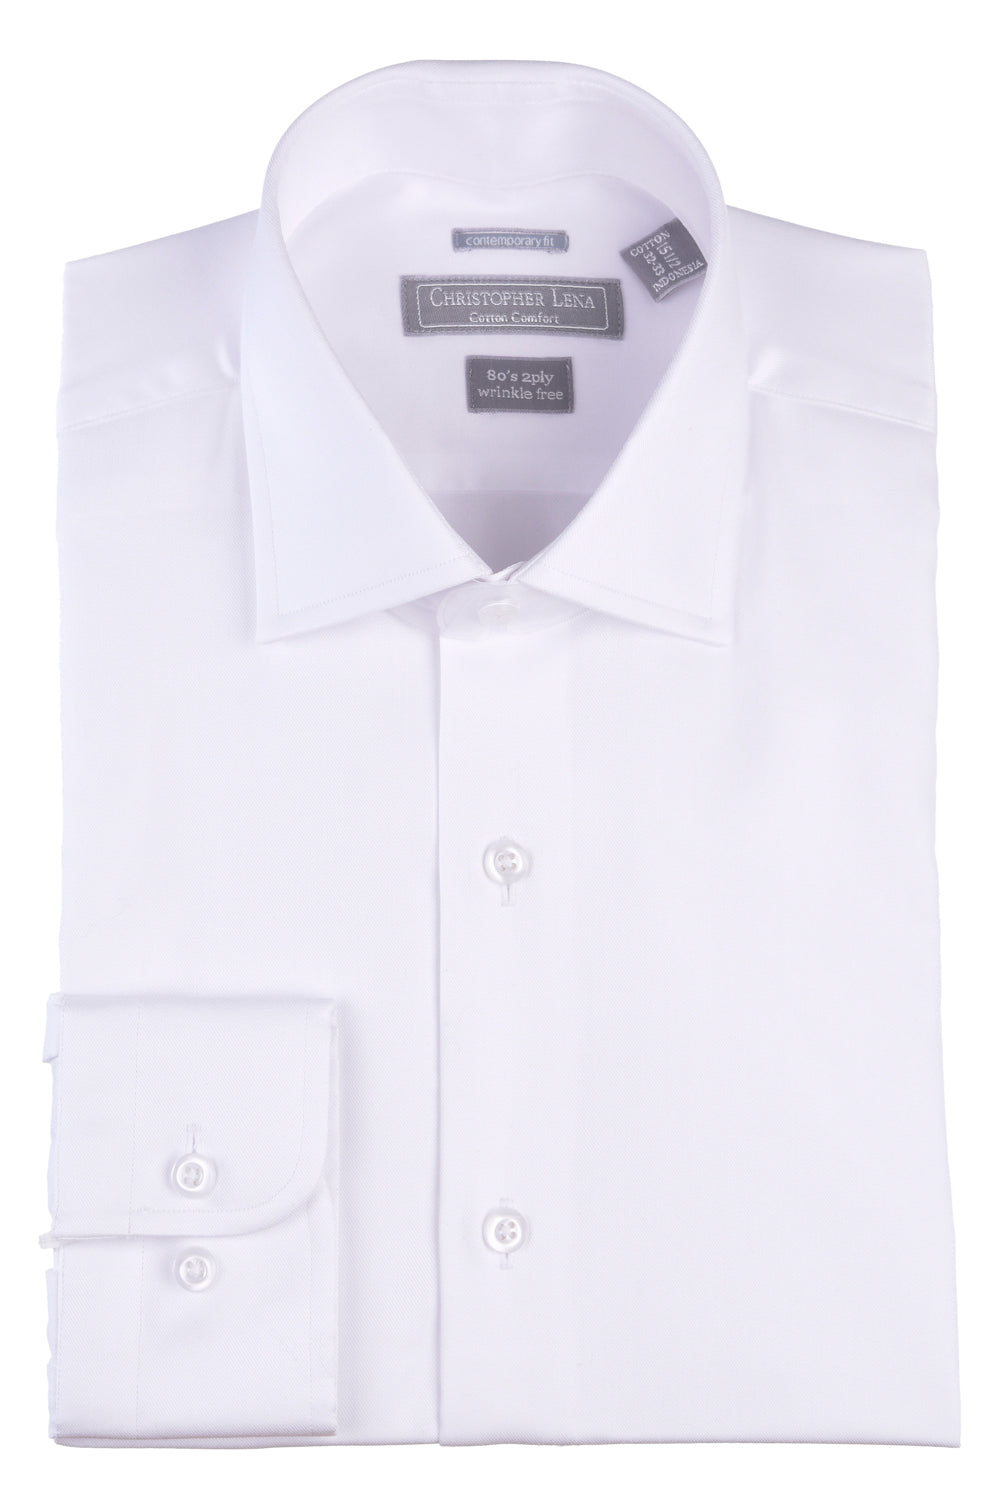 Christopher Lena - White - Dress Shirt- 100% Cotton - 80's 2-ply - Wrinkle Free - Contemporary Fit